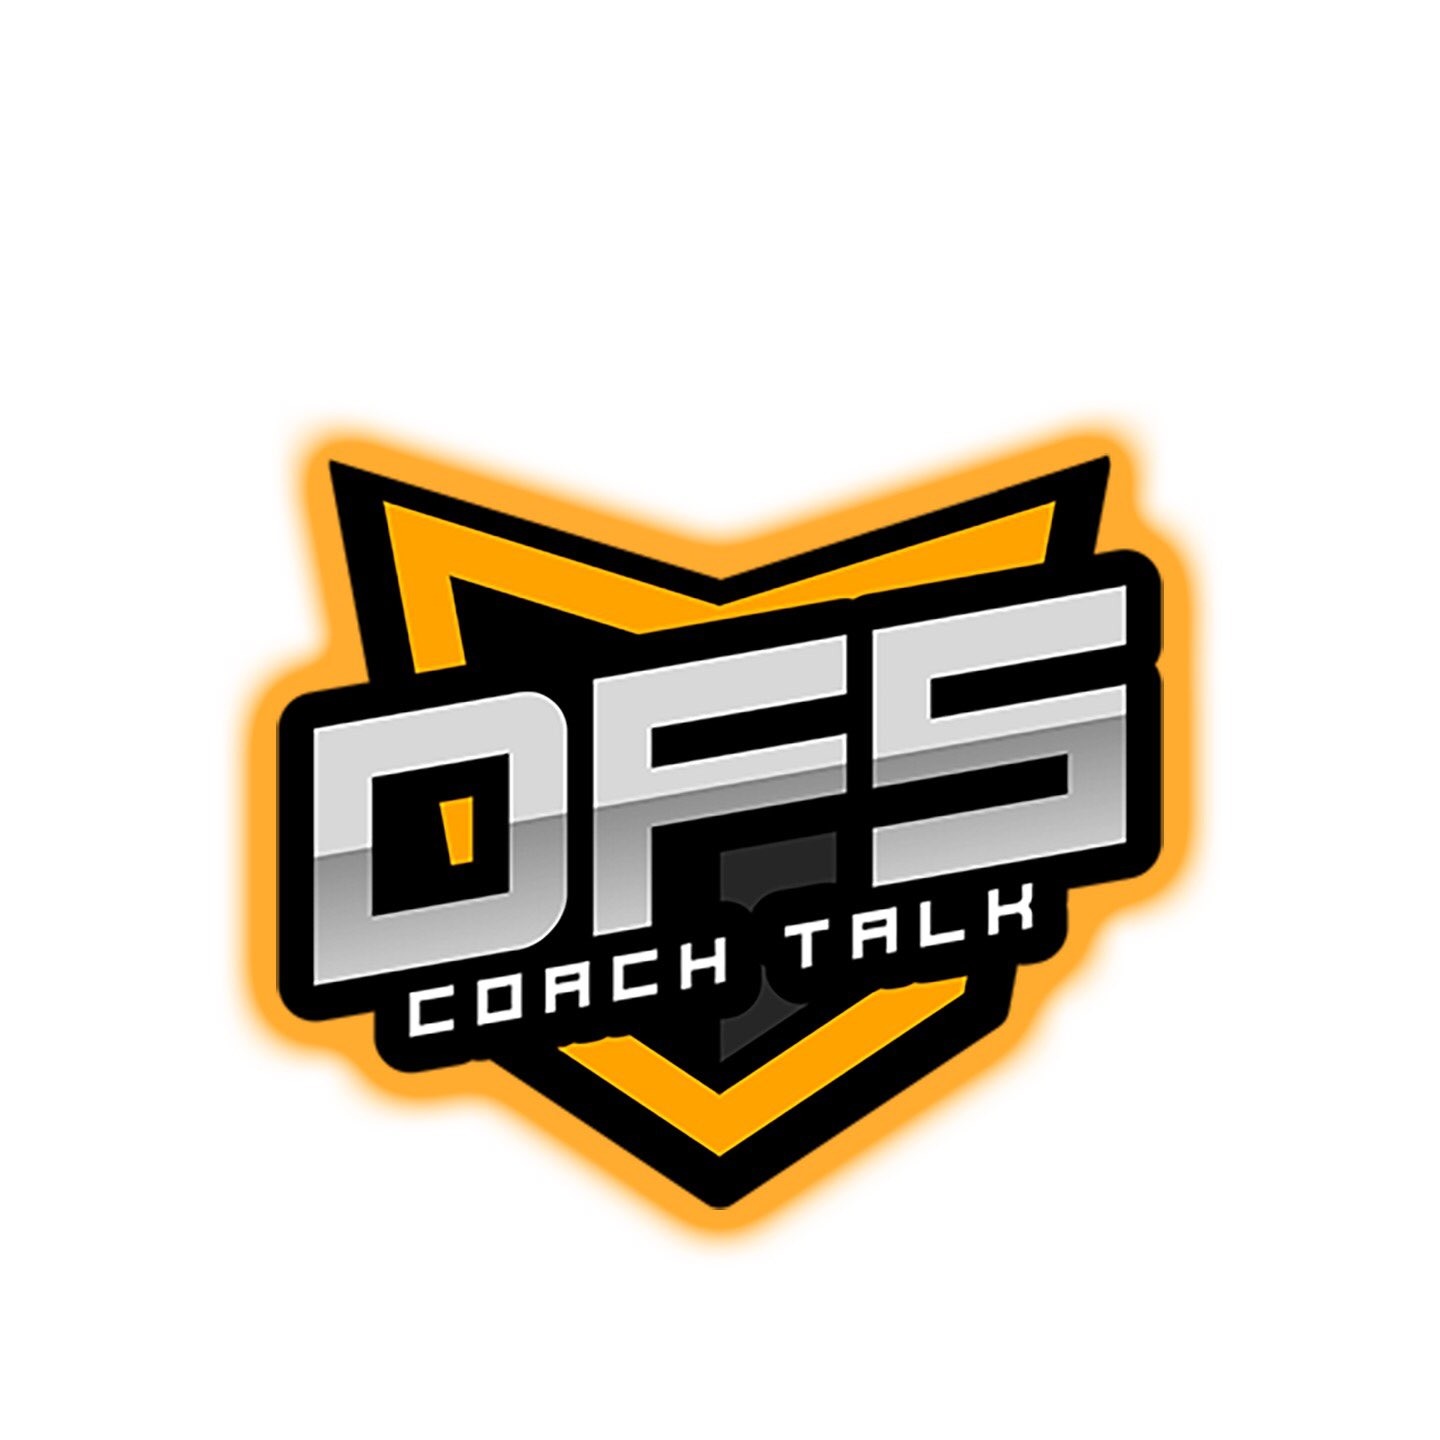 NFL DFS WEEK 5 PLAYER PICKS FOR FANDUEL AND DRAFTKINGS  WITH DFS COACH TALK! LETS GO!